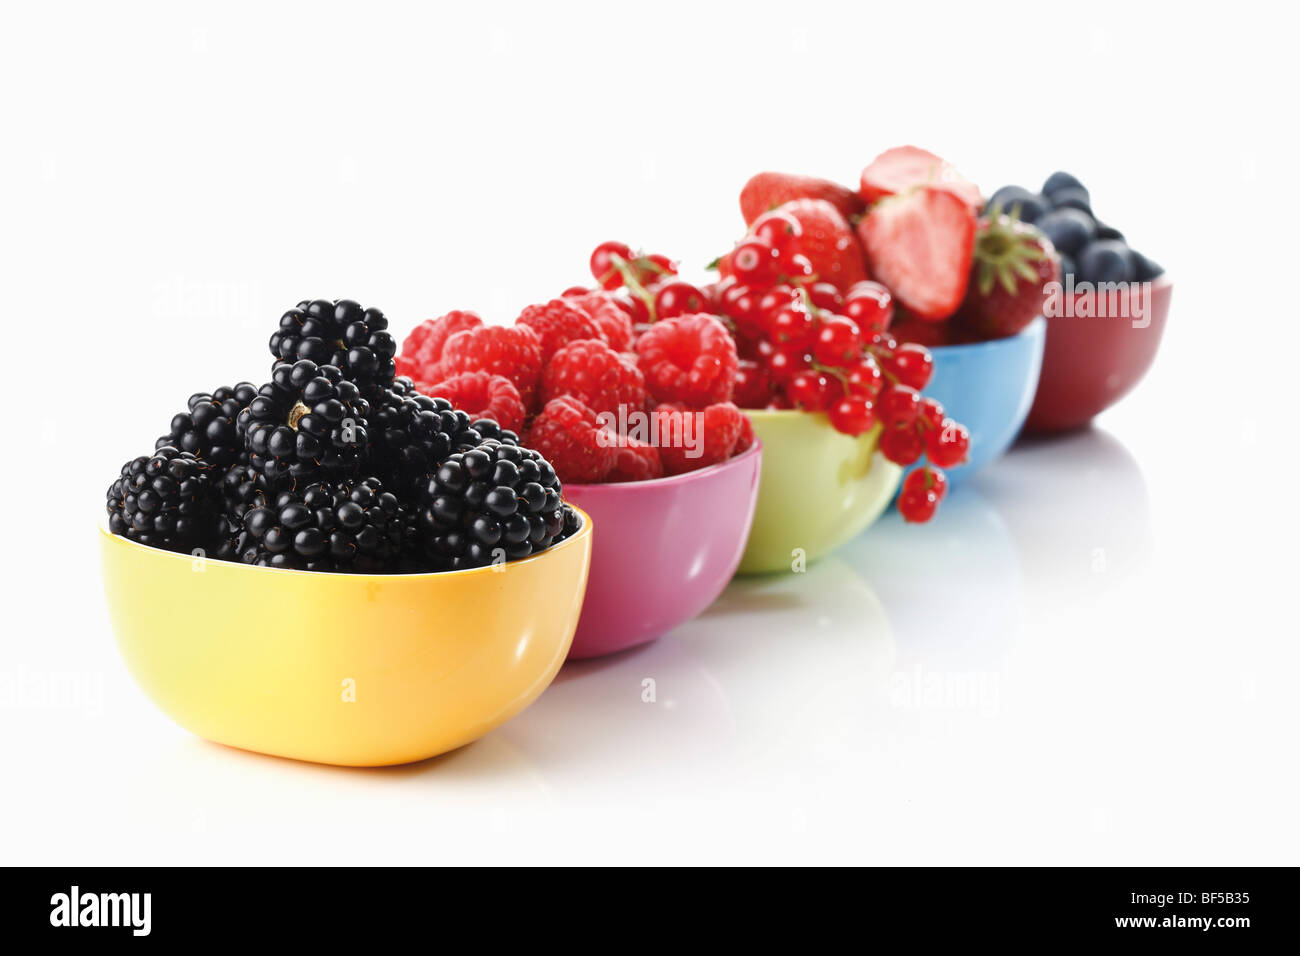 Forest berries, colorful dishes with wild berries, blueberries, blackberries, raspberries, currants, strawberries Stock Photo